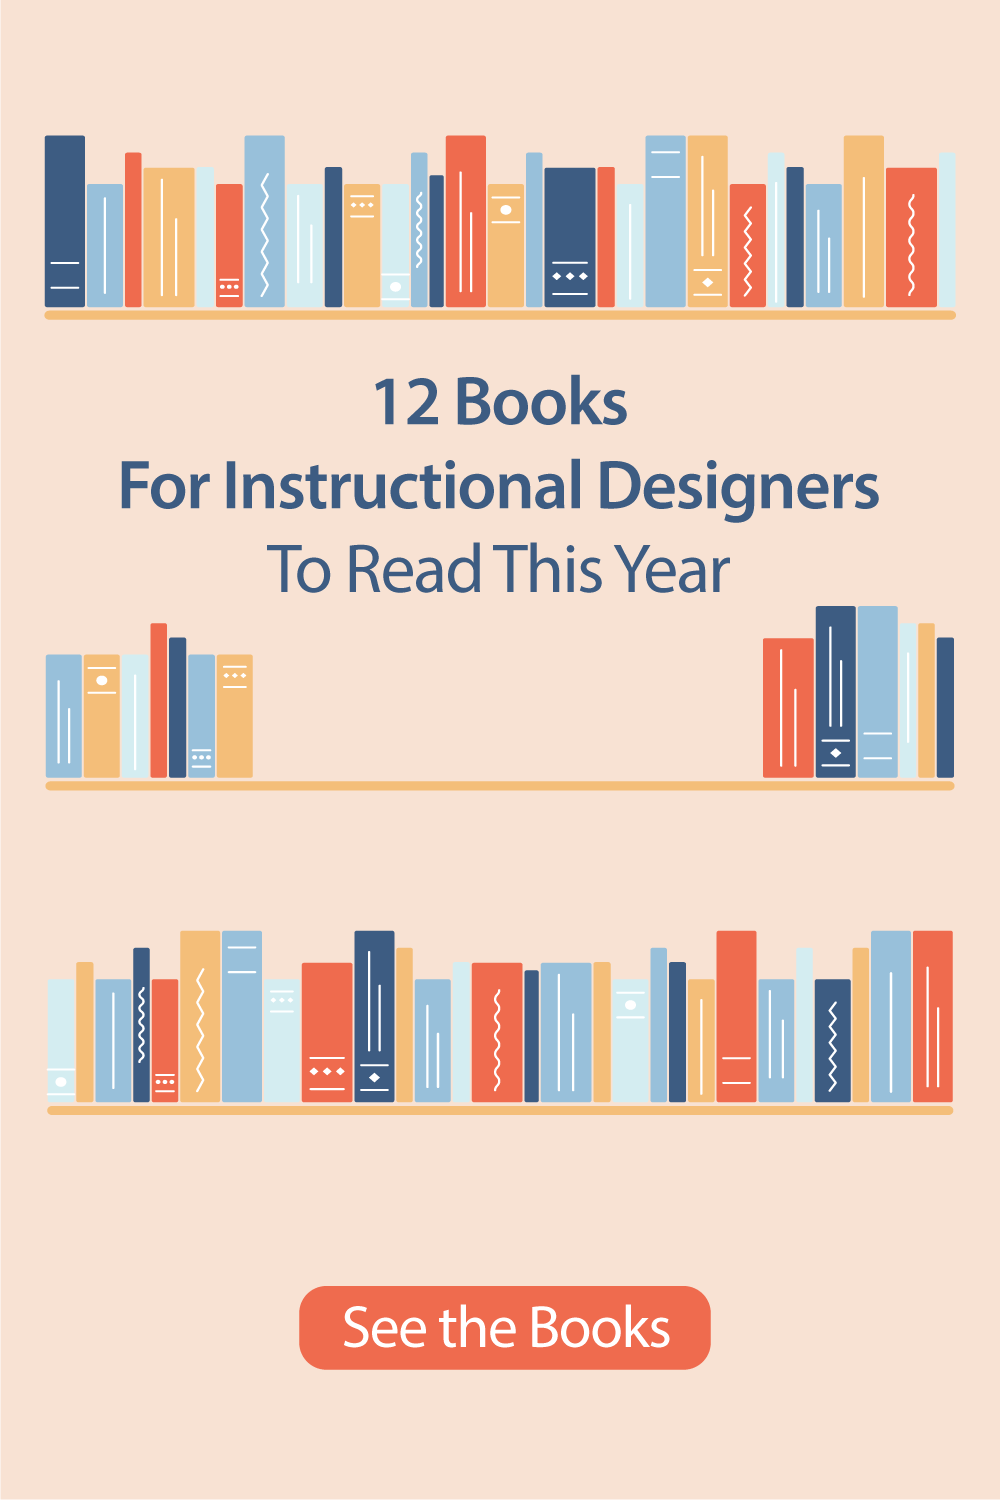 12 Books for Instructional Designers to Read This Year